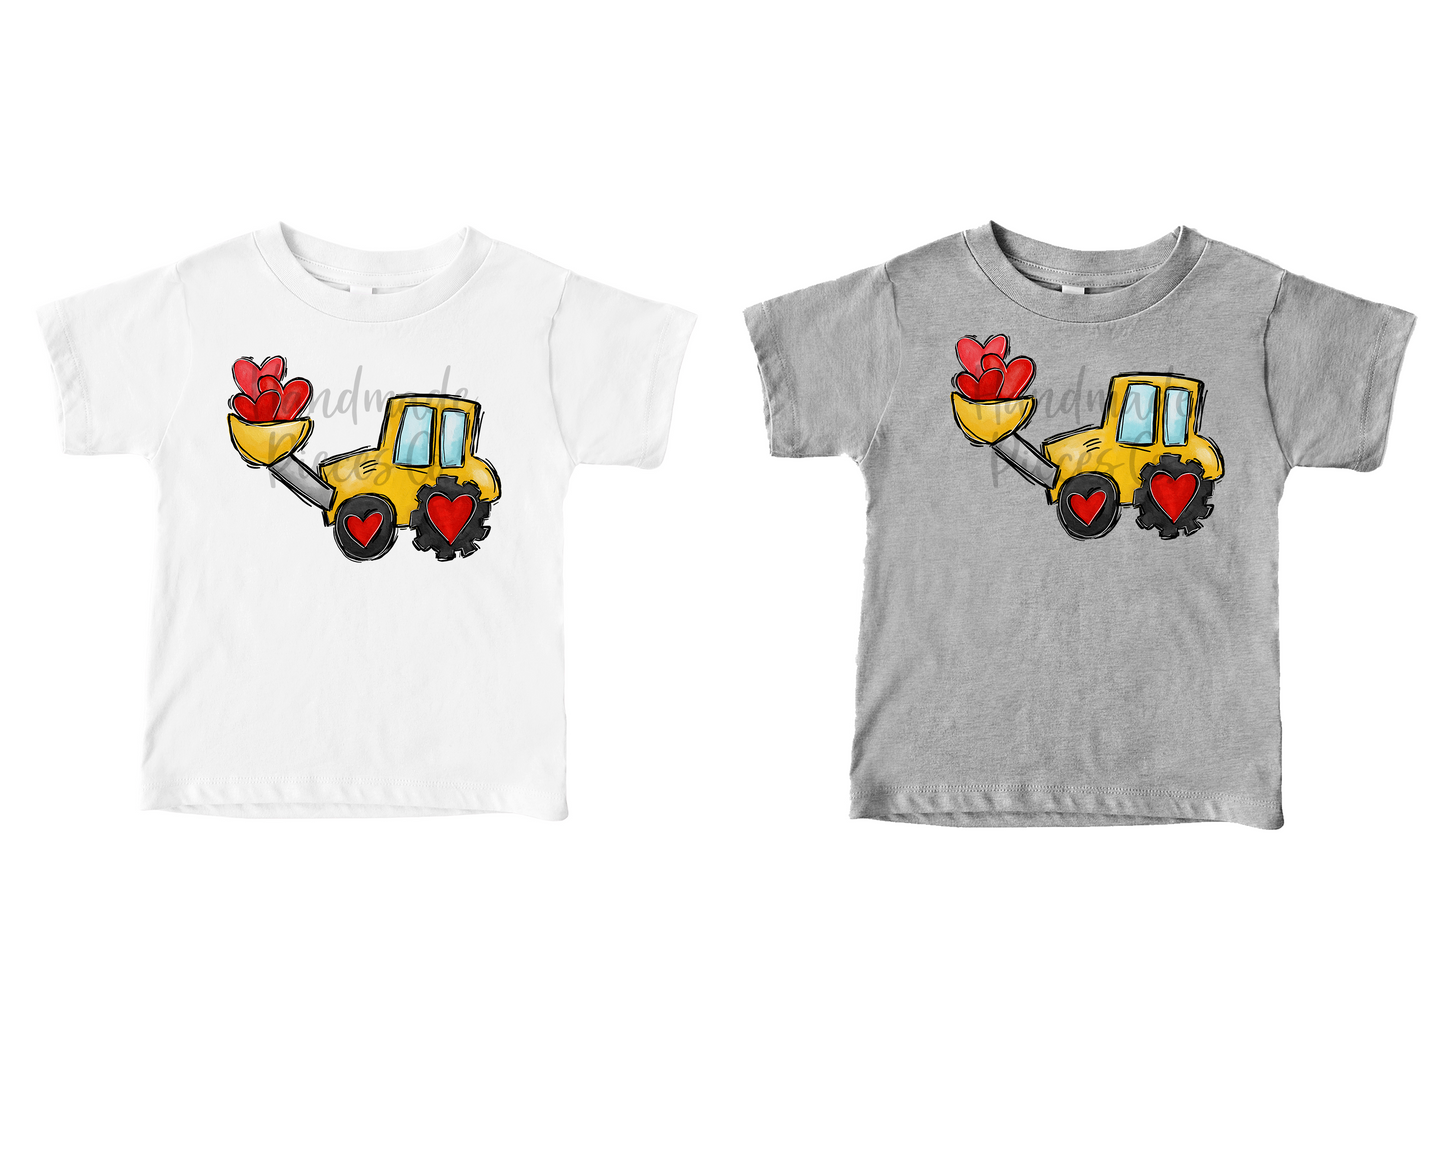 Tractor with Hearts - Sublimation or HTV Transfer